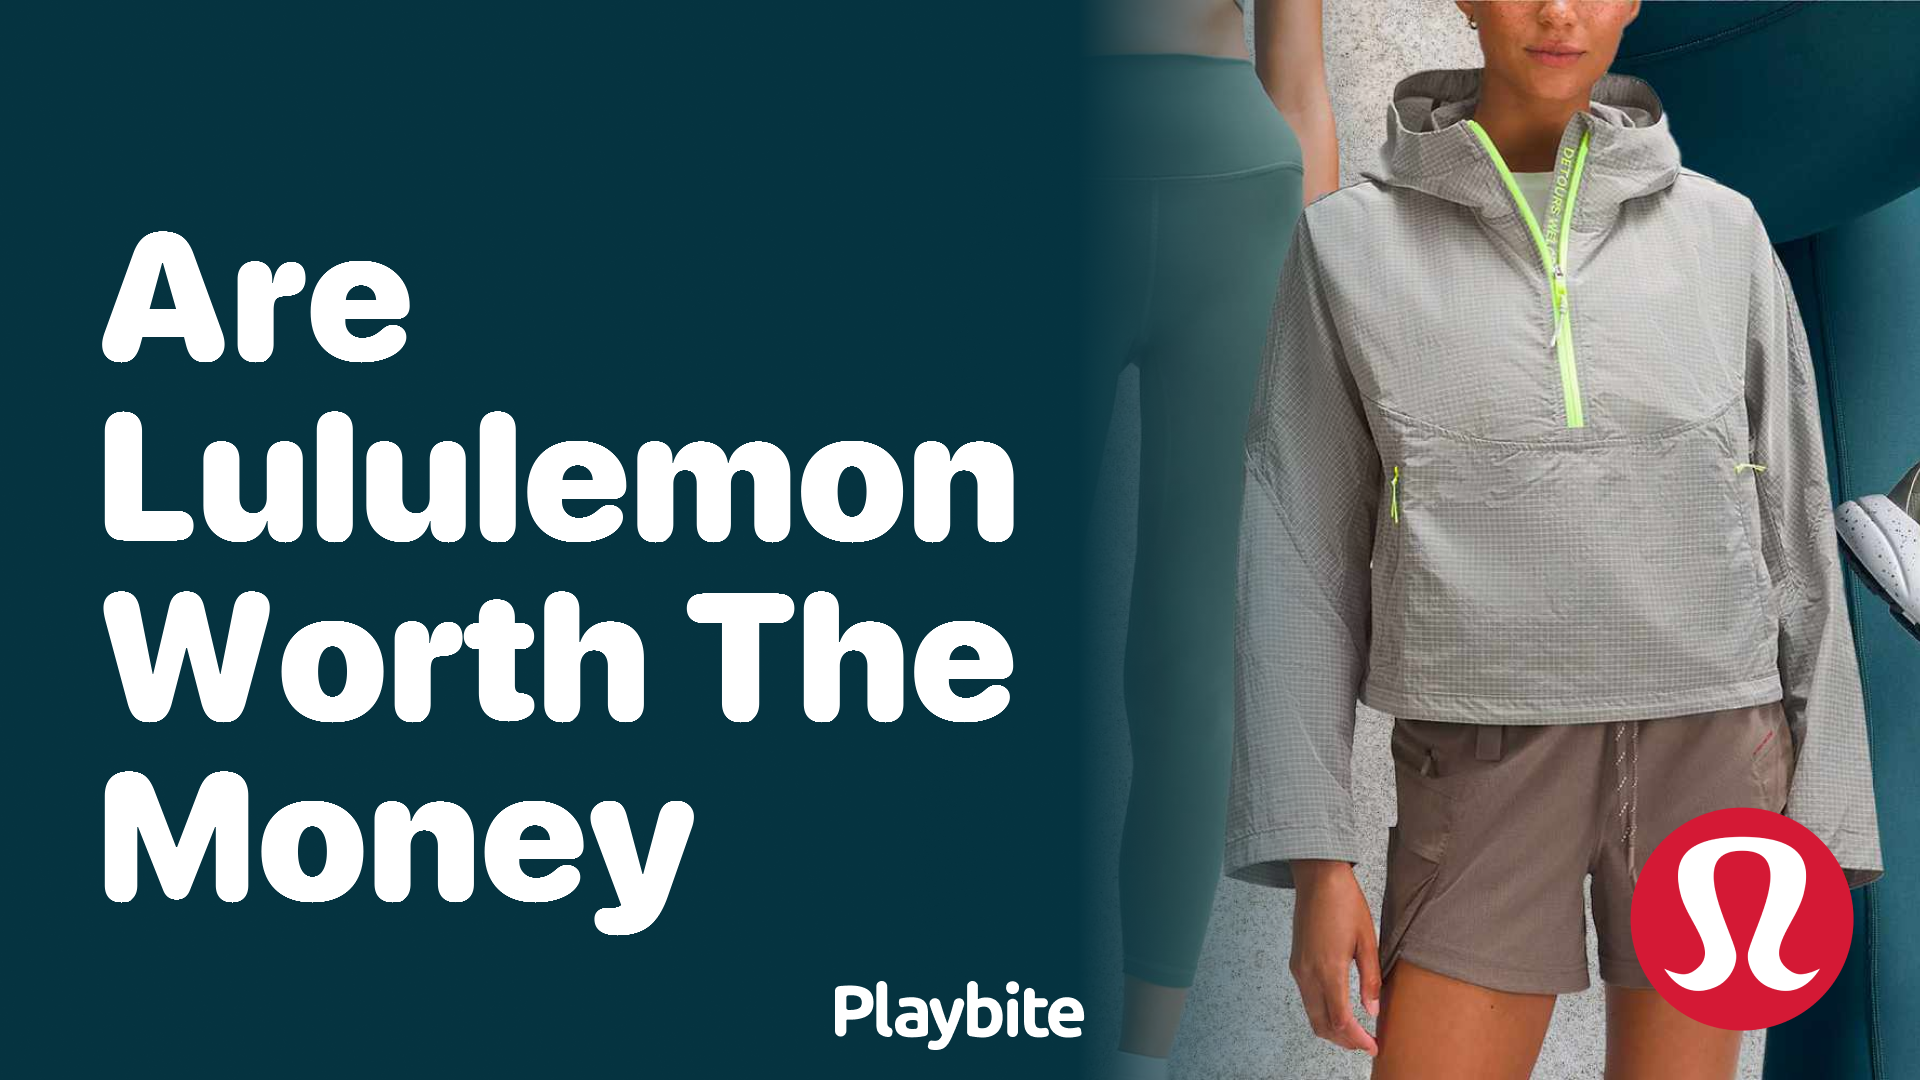 Are Lululemon Products Worth the Money? - Playbite